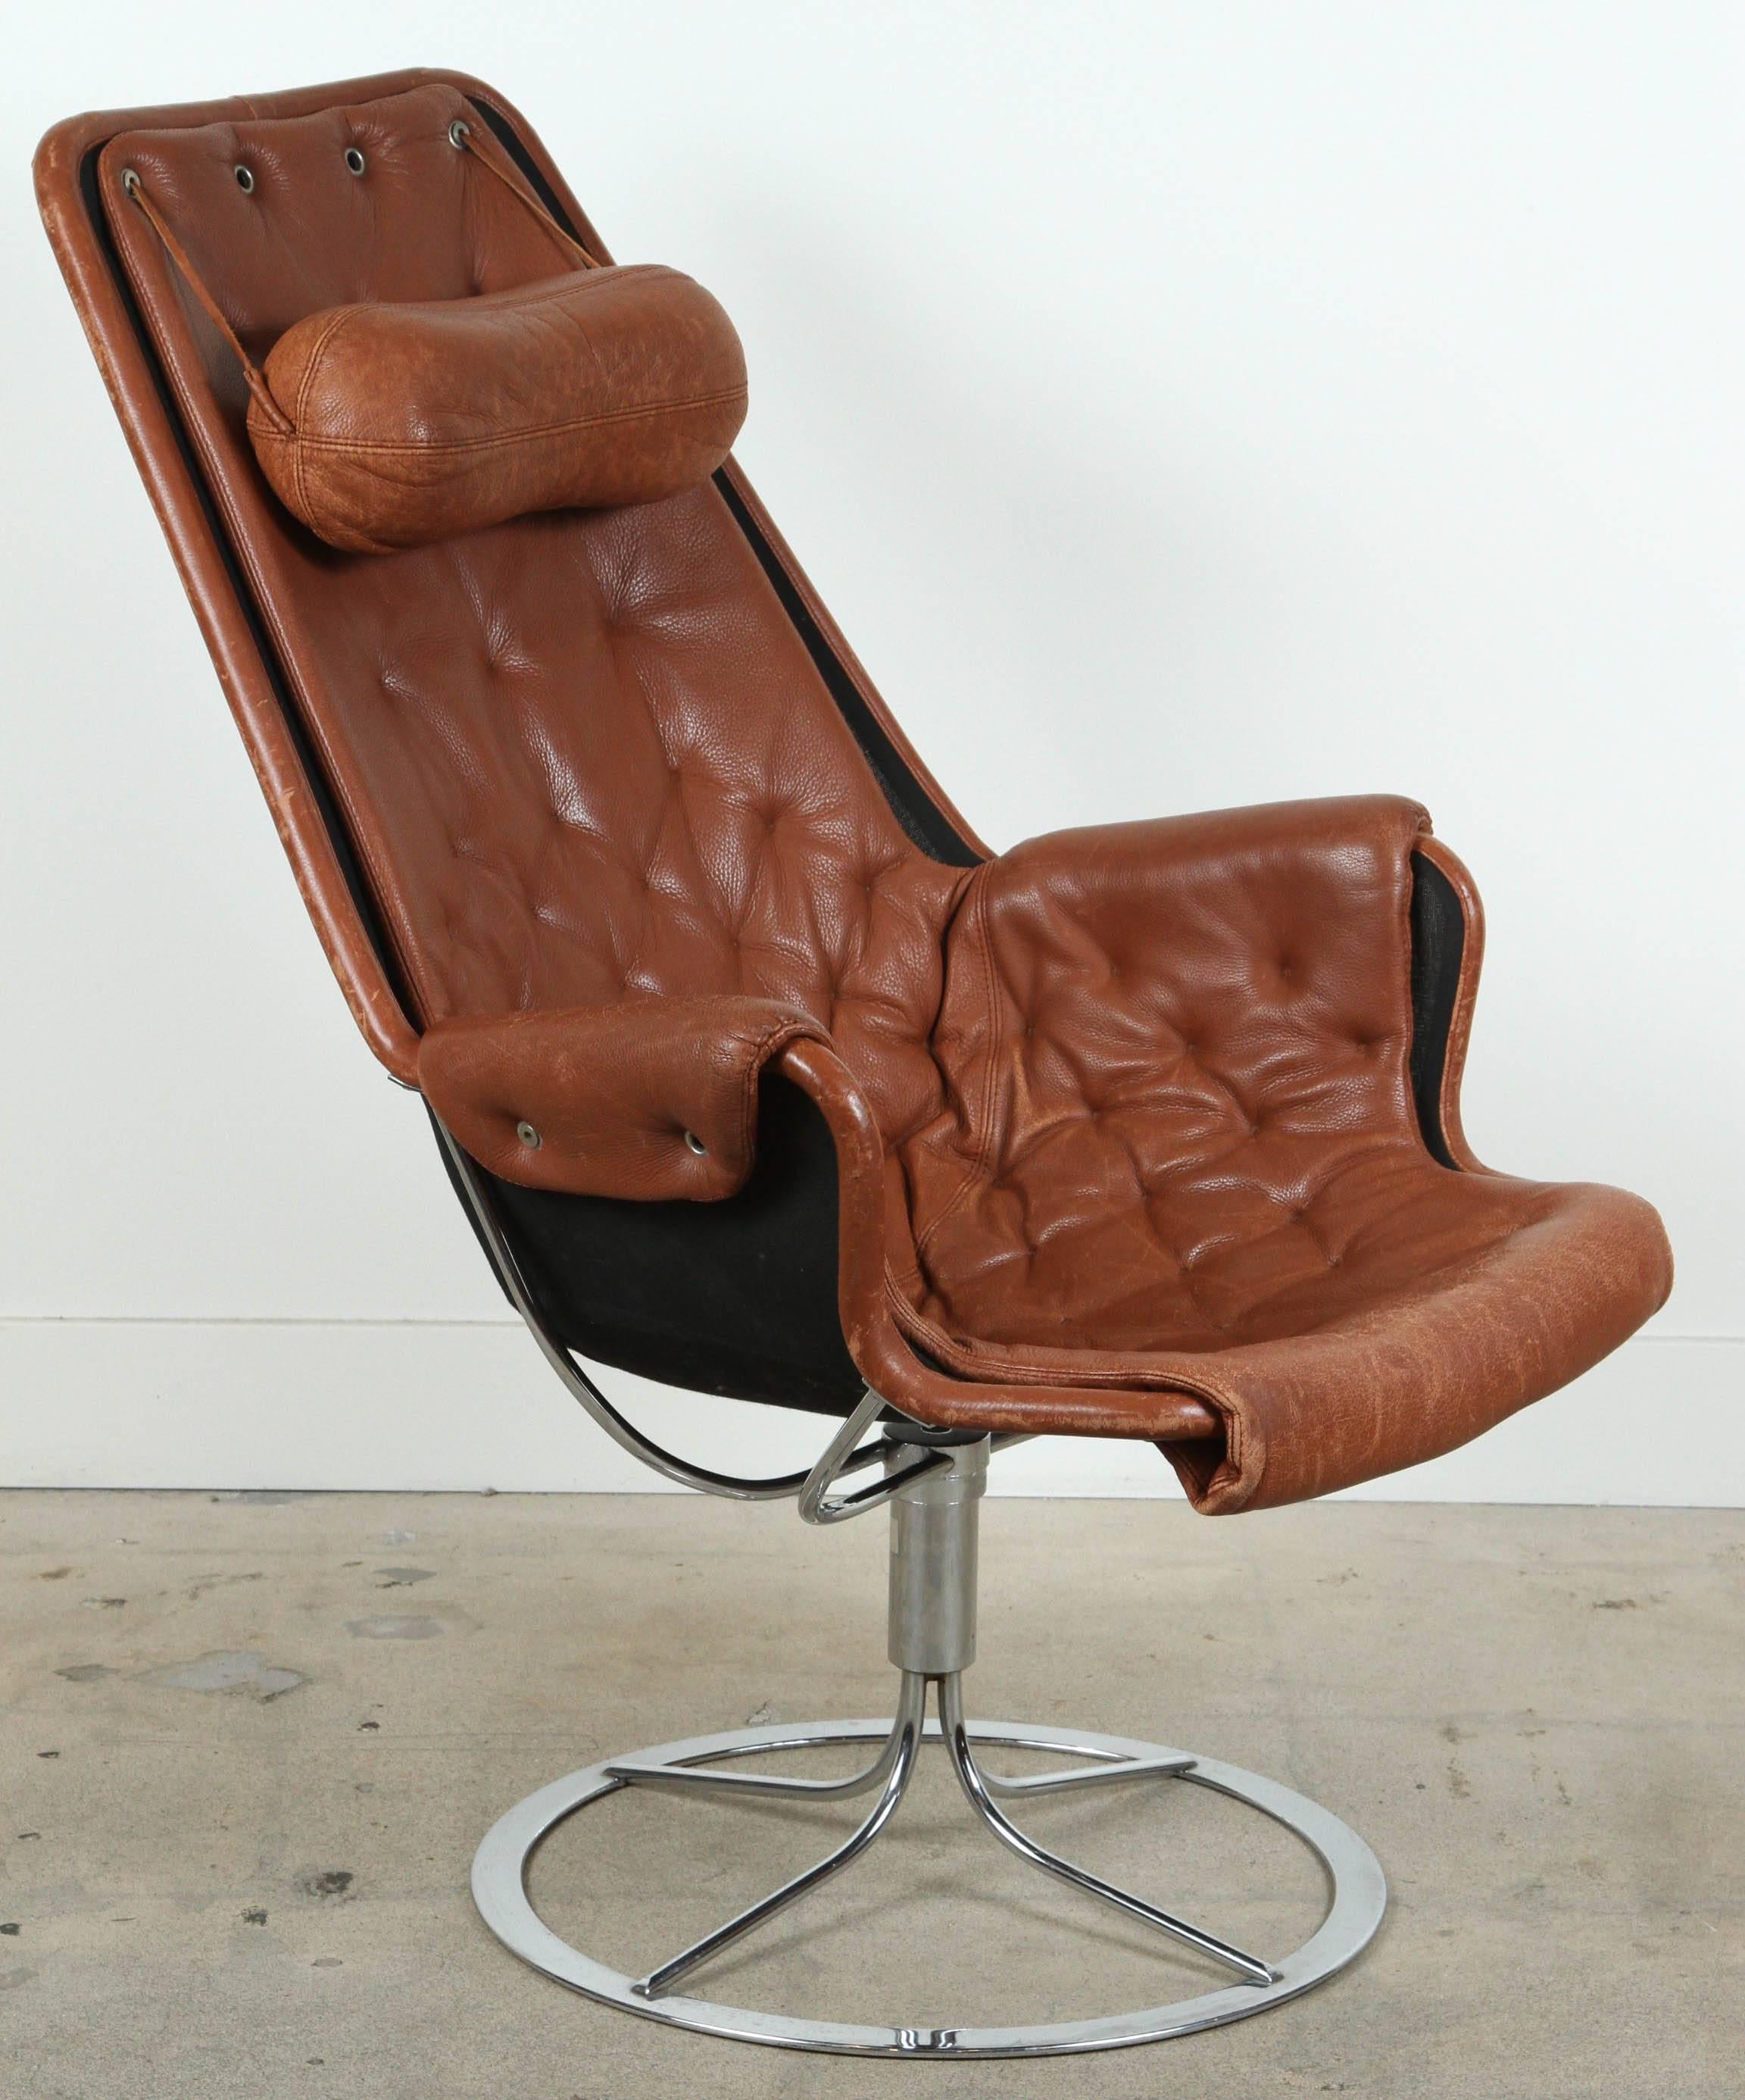 the jetson chair